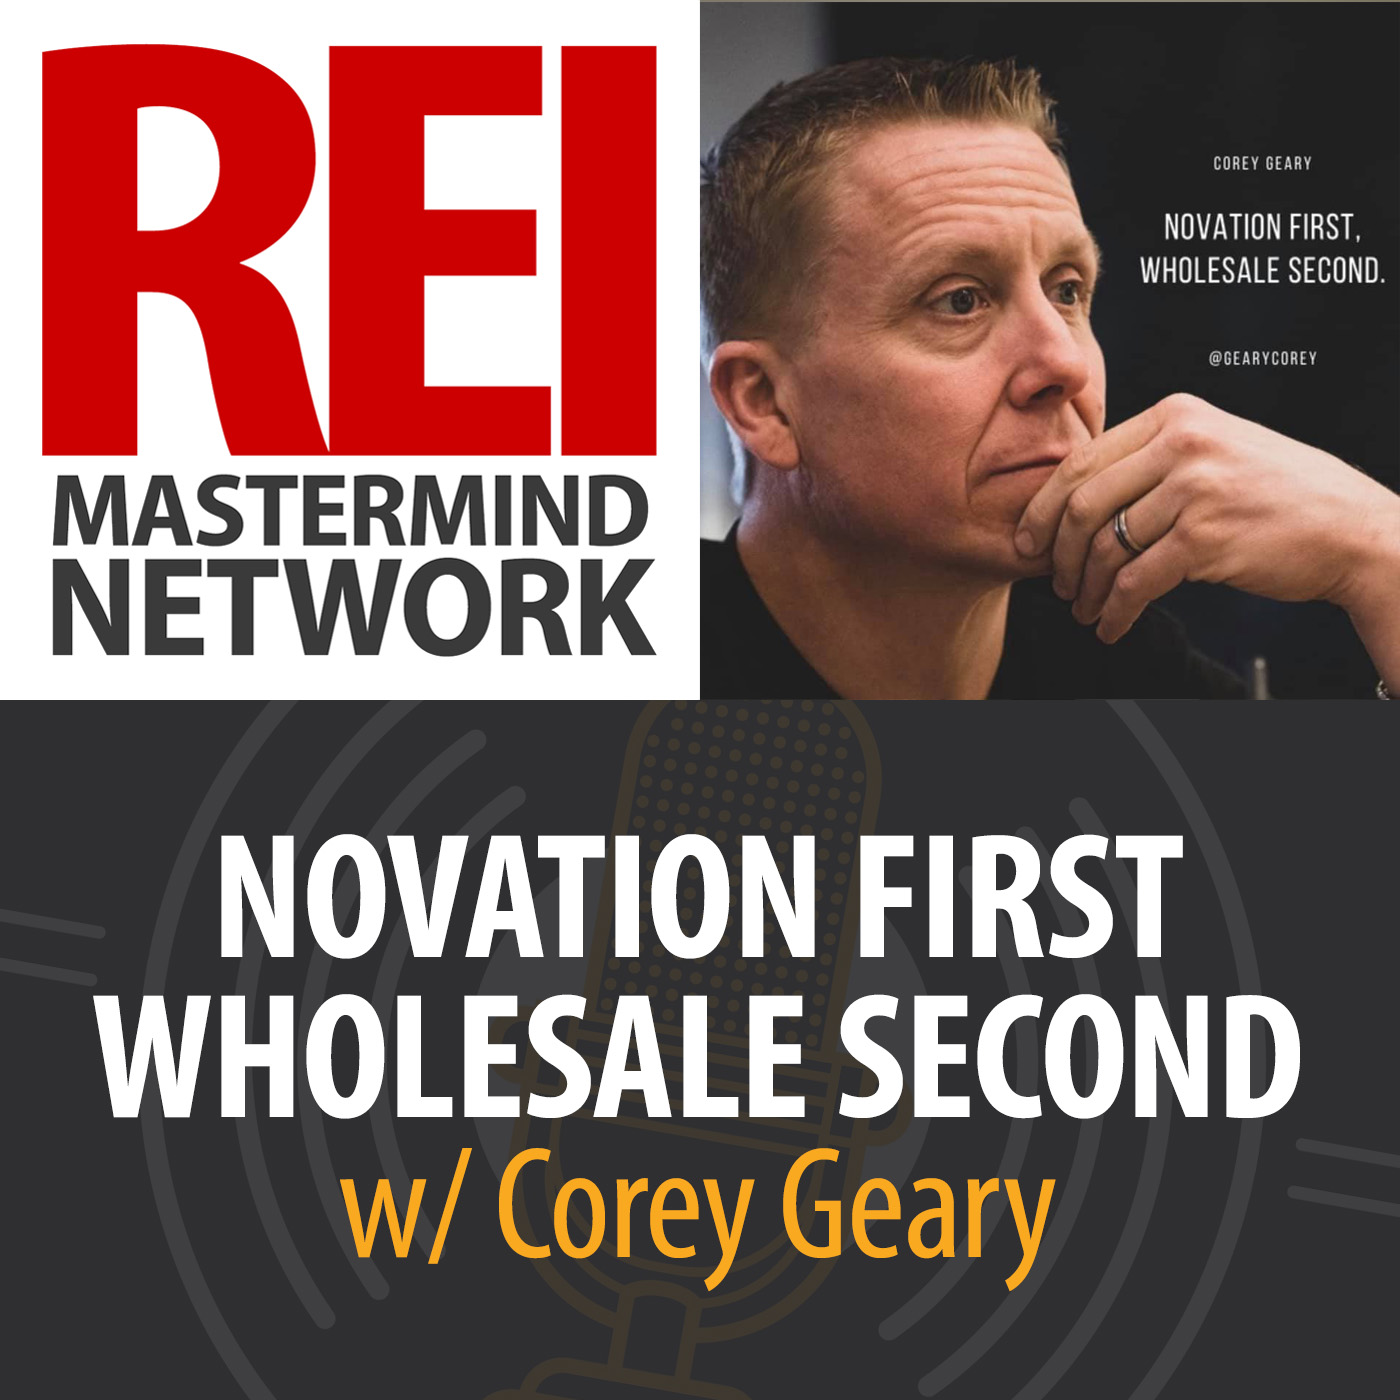 Novation First Wholesale Second with Corey Geary Image